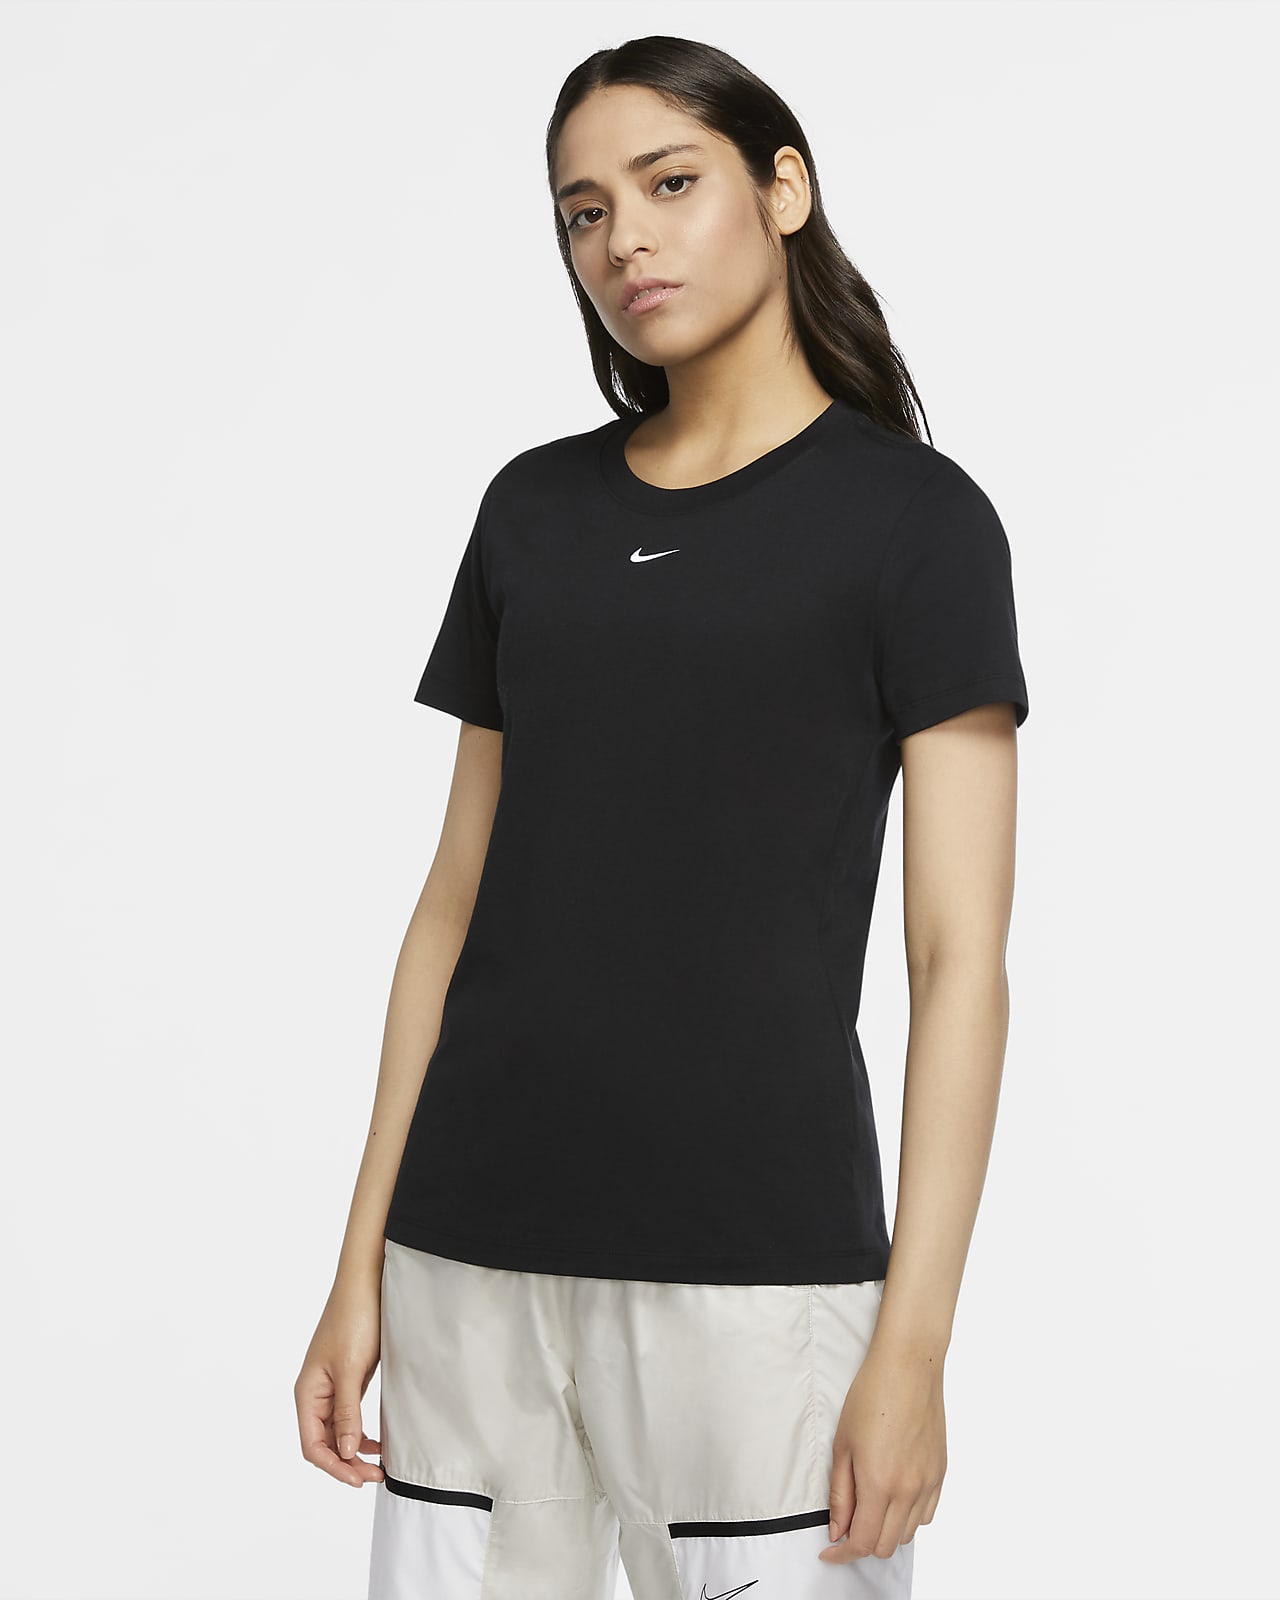 https://static.nike.com/a/images/t_PDP_1280_v1/f_auto,q_auto:eco/b172164c-9b72-4c48-962f-907b78e5acb0/sportswear-t-shirt-nVFkkl.png